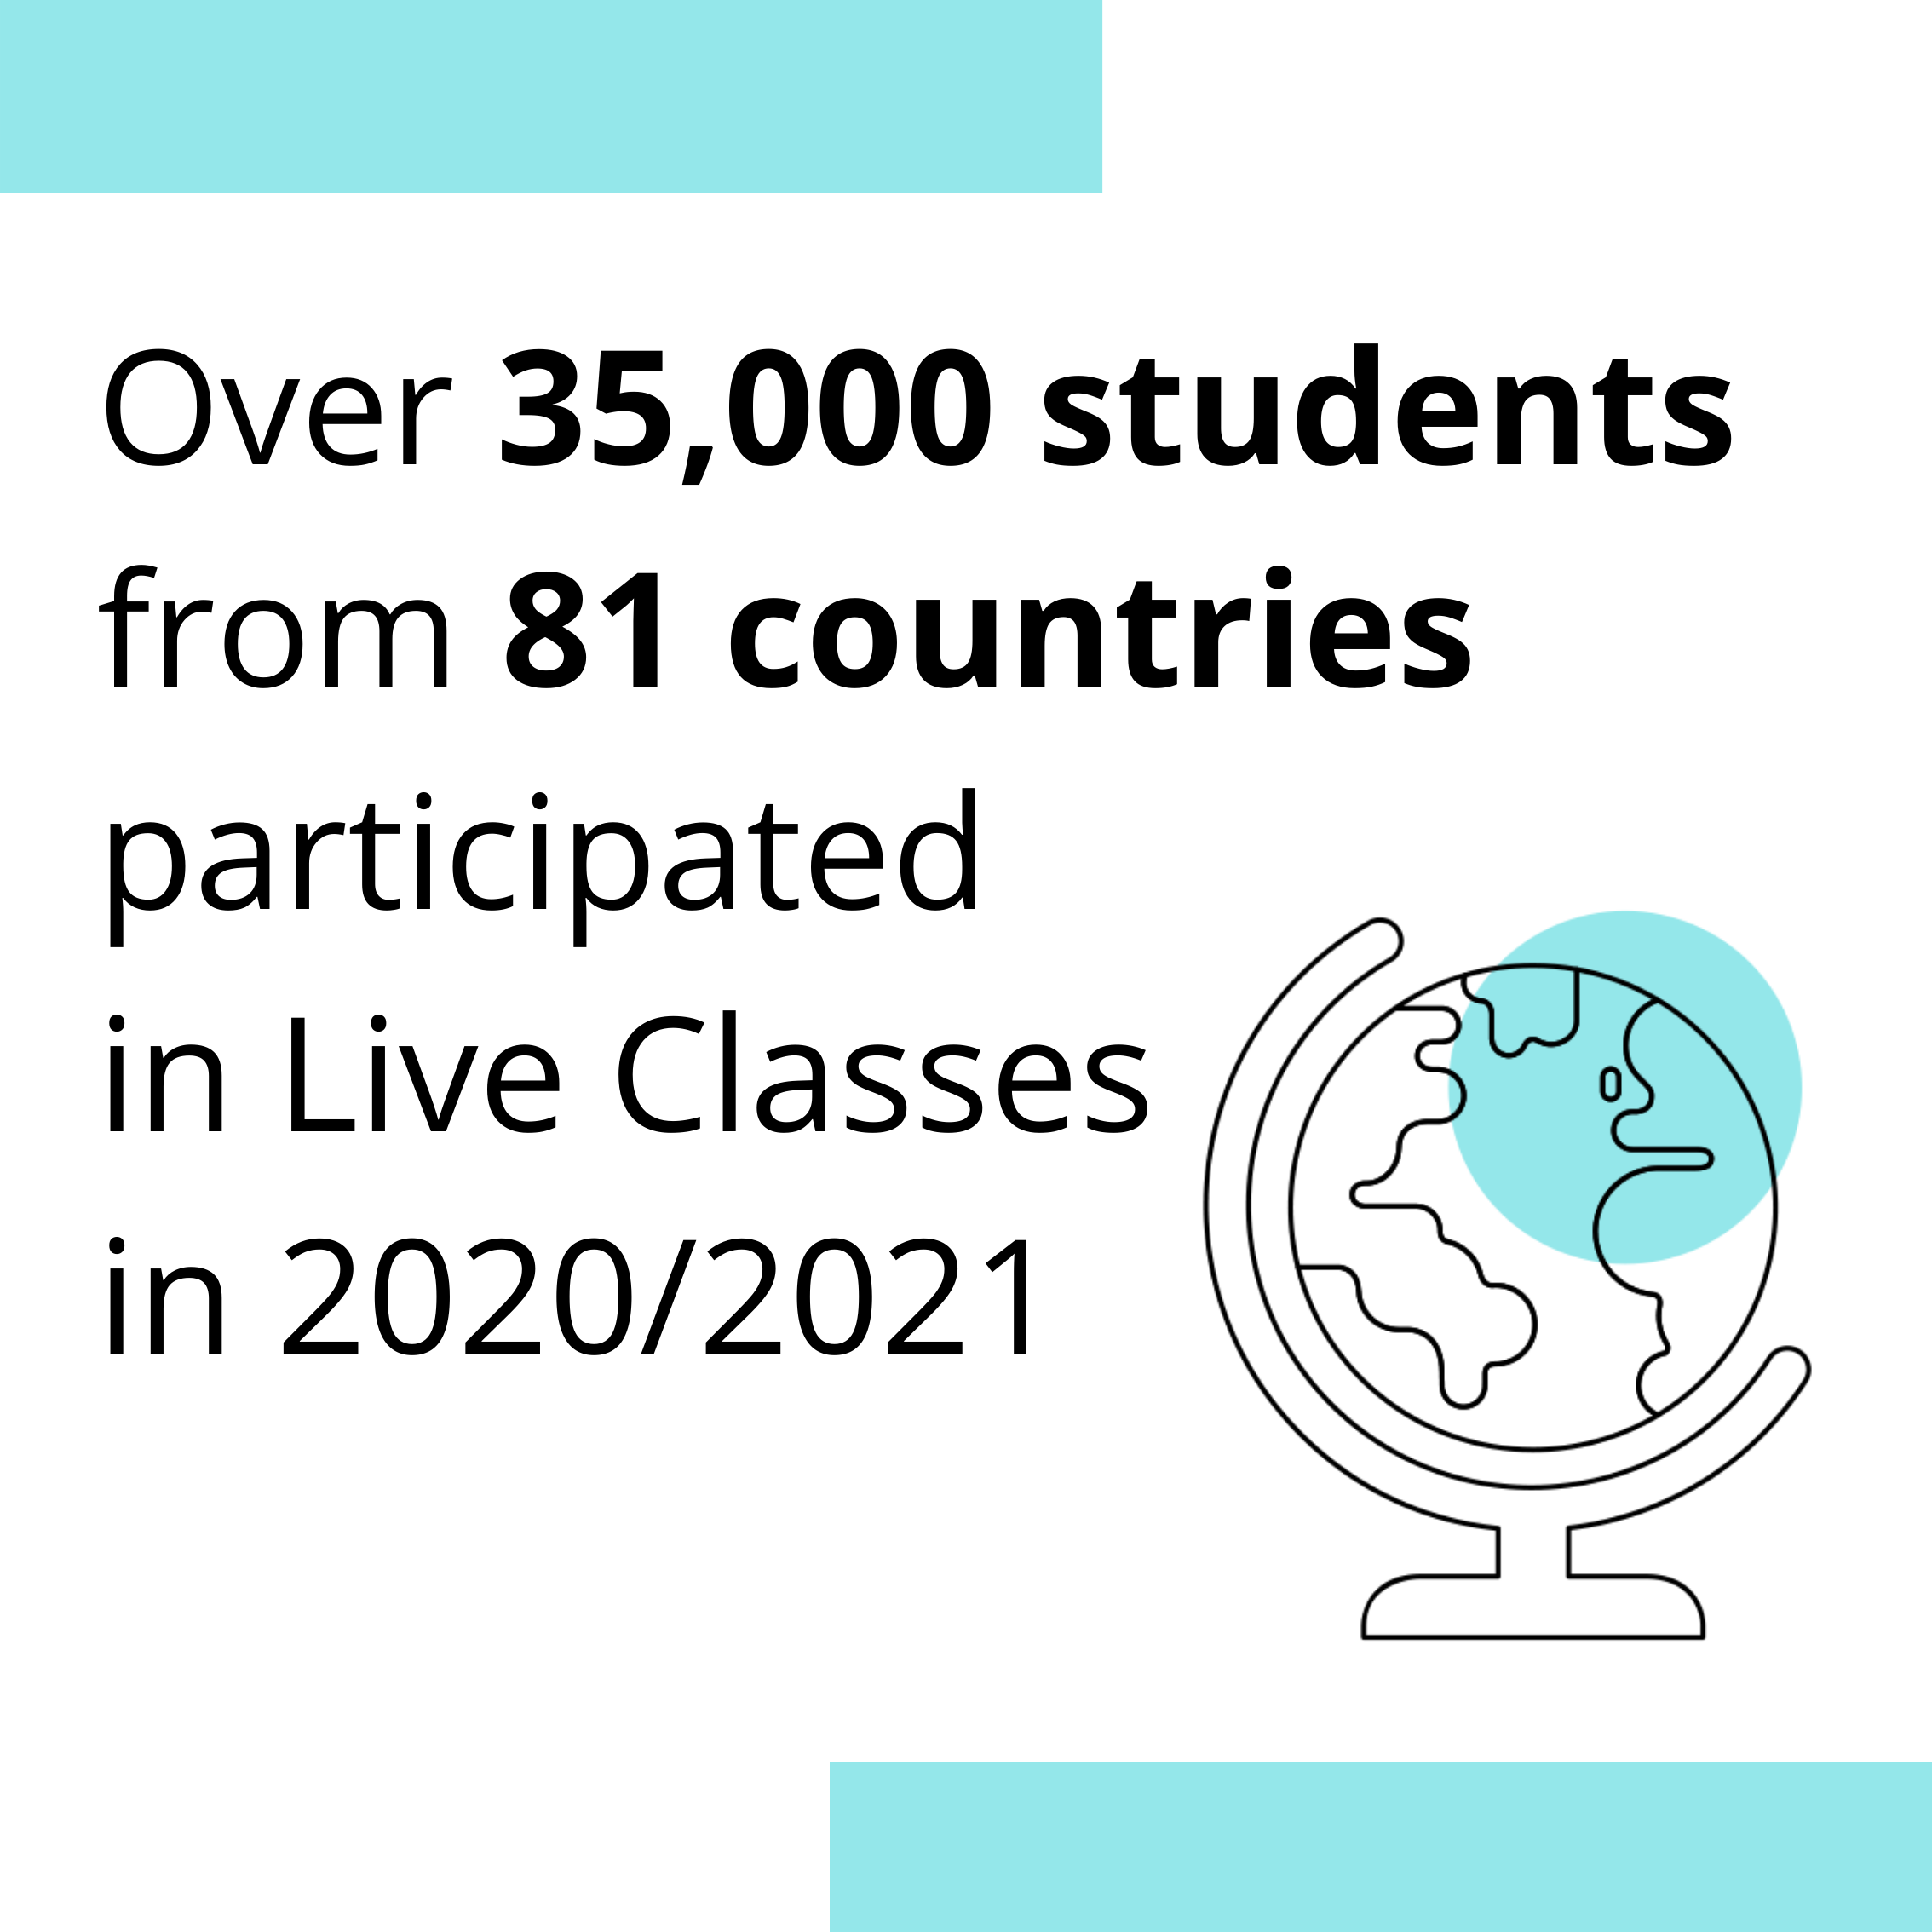 Over 35,000 students from 81 countries have participated in Live Classes in 2020/2021